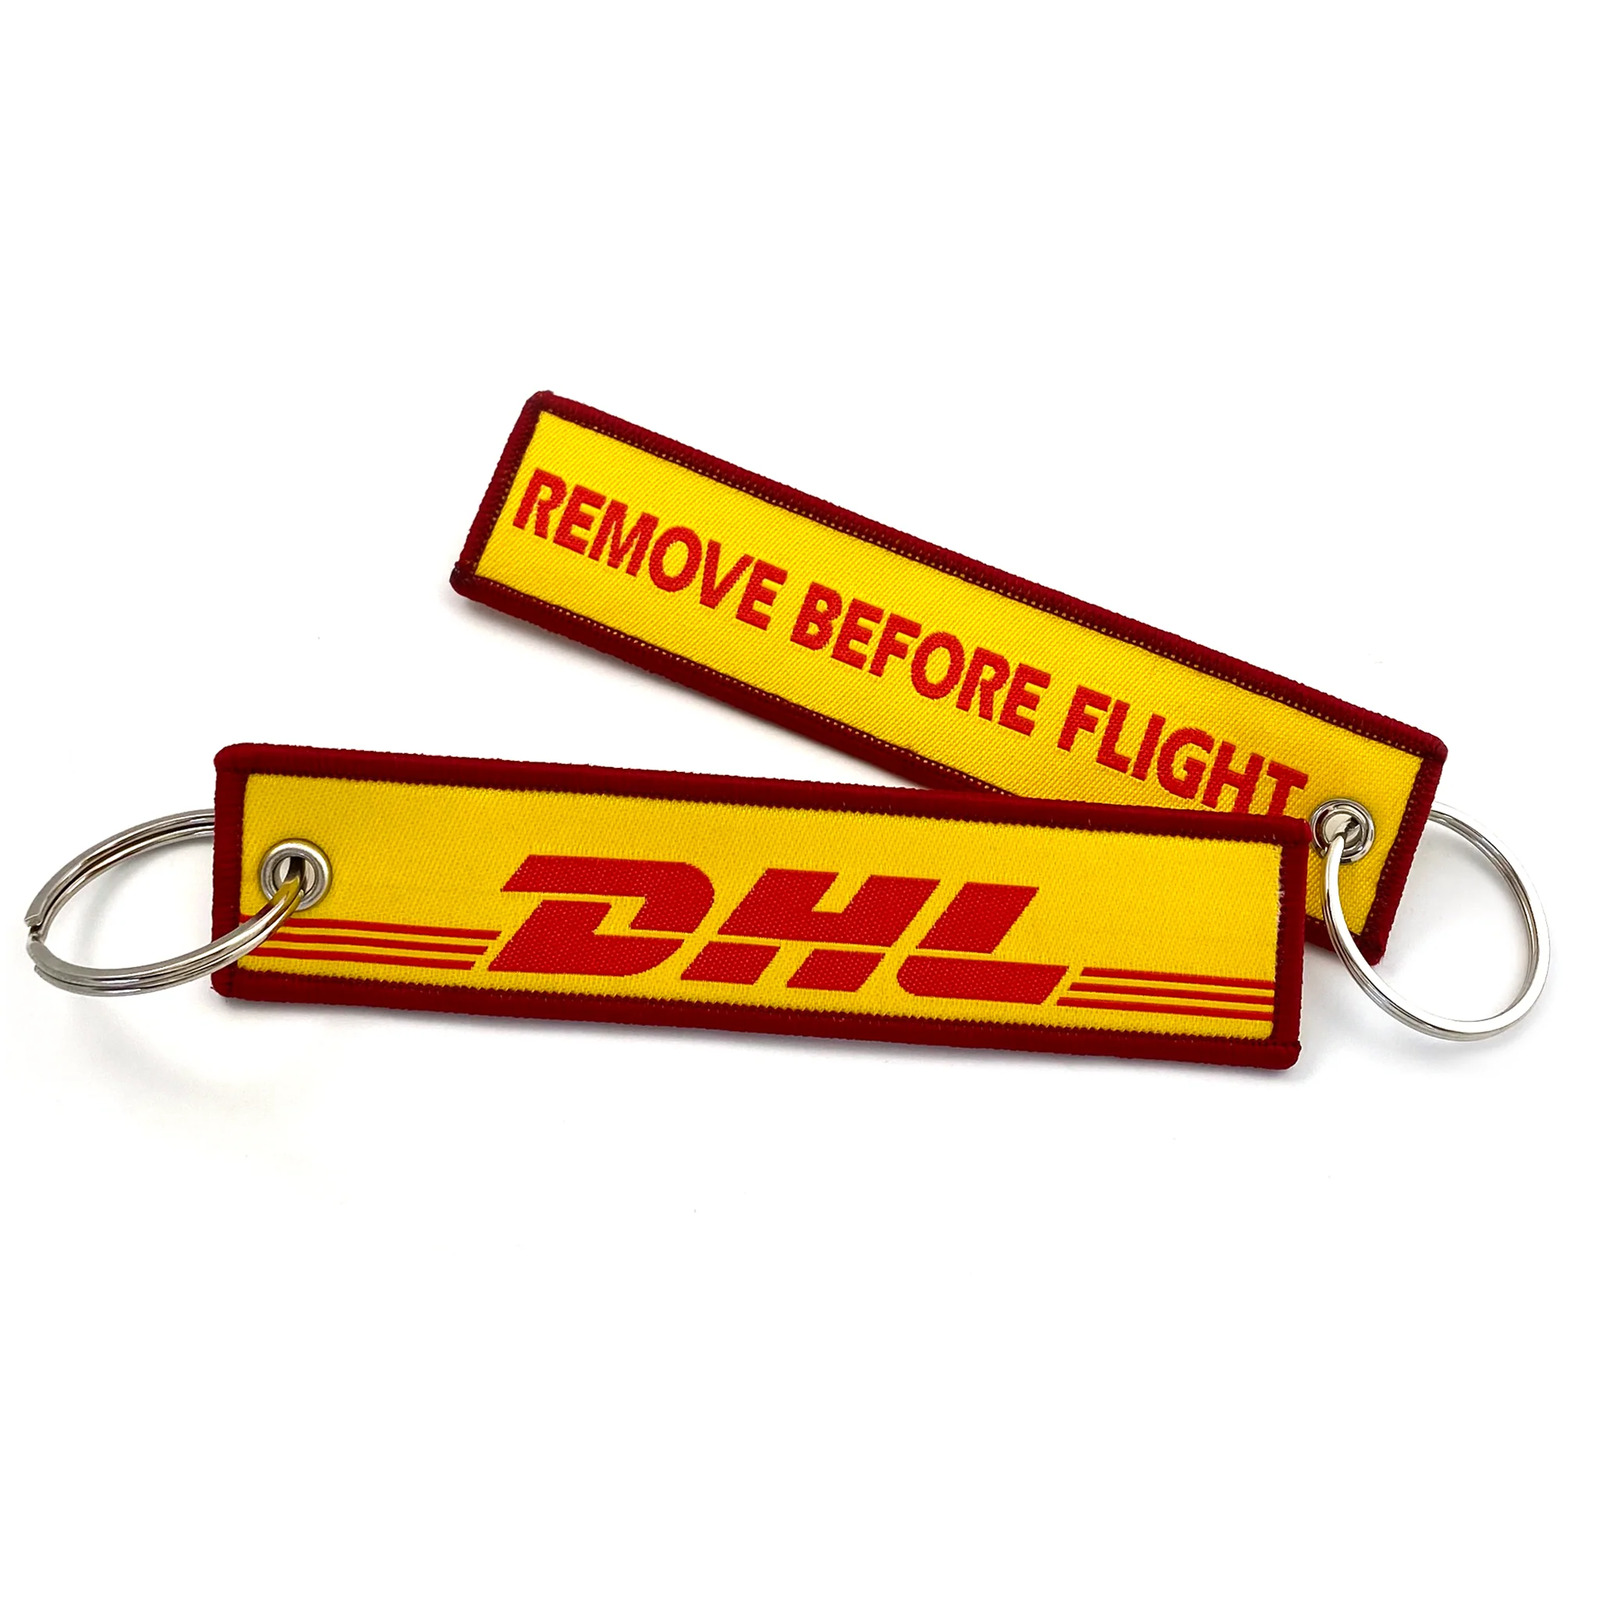 DHL Airlines RBF Woven Keyring